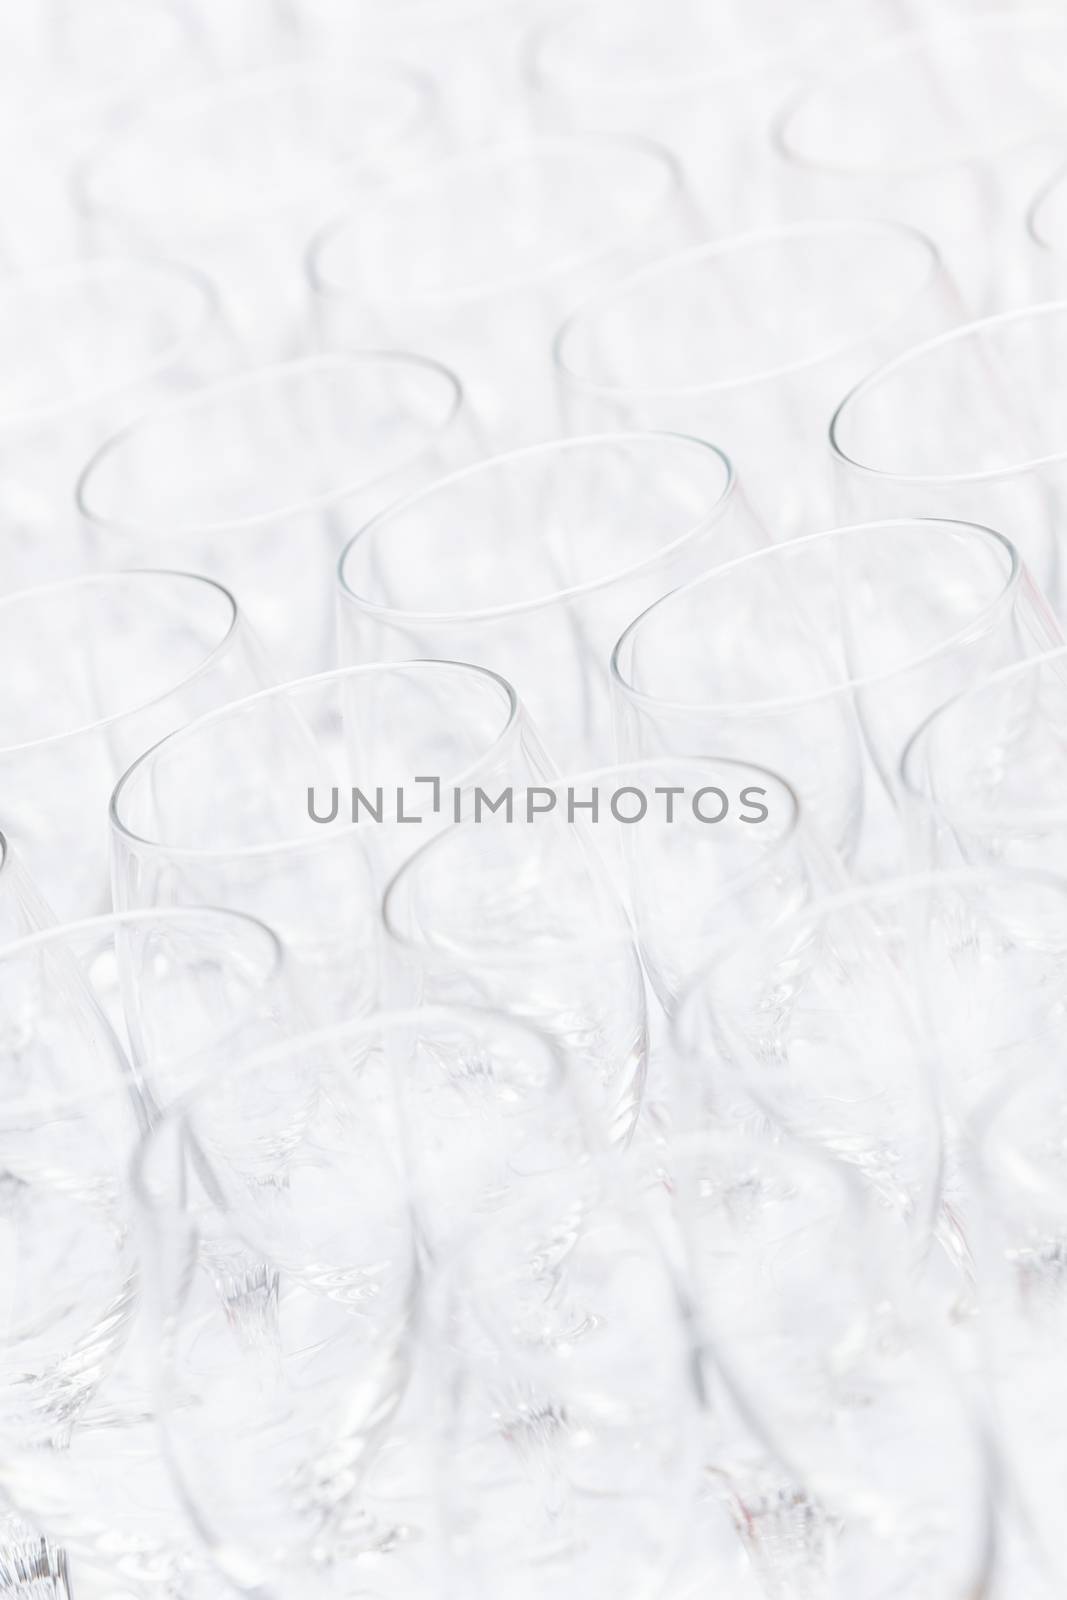 Background pattern of empty christal glasses. Banquet event.